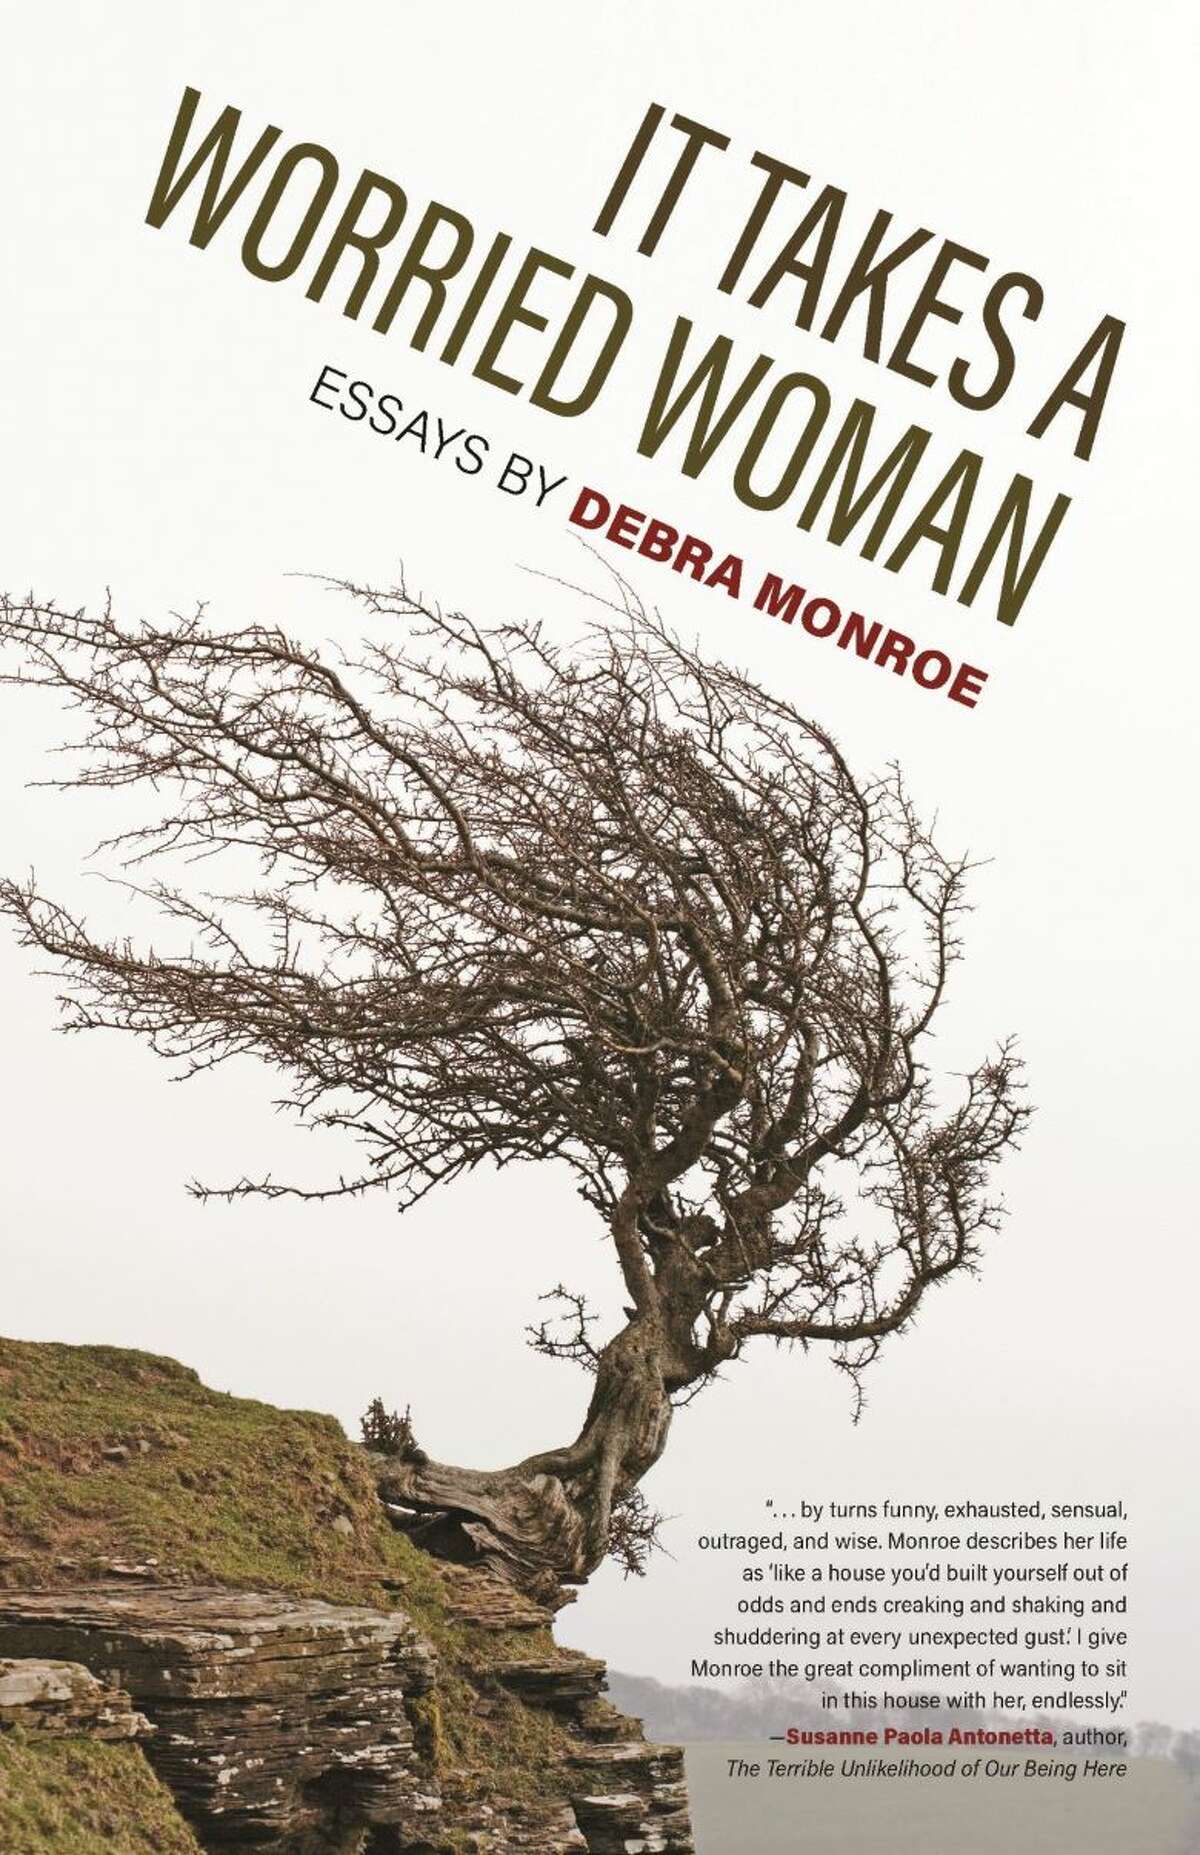 Texas author Debra Monroe has a new collection of essays, "It Takes a Worried Woman" out this month. 